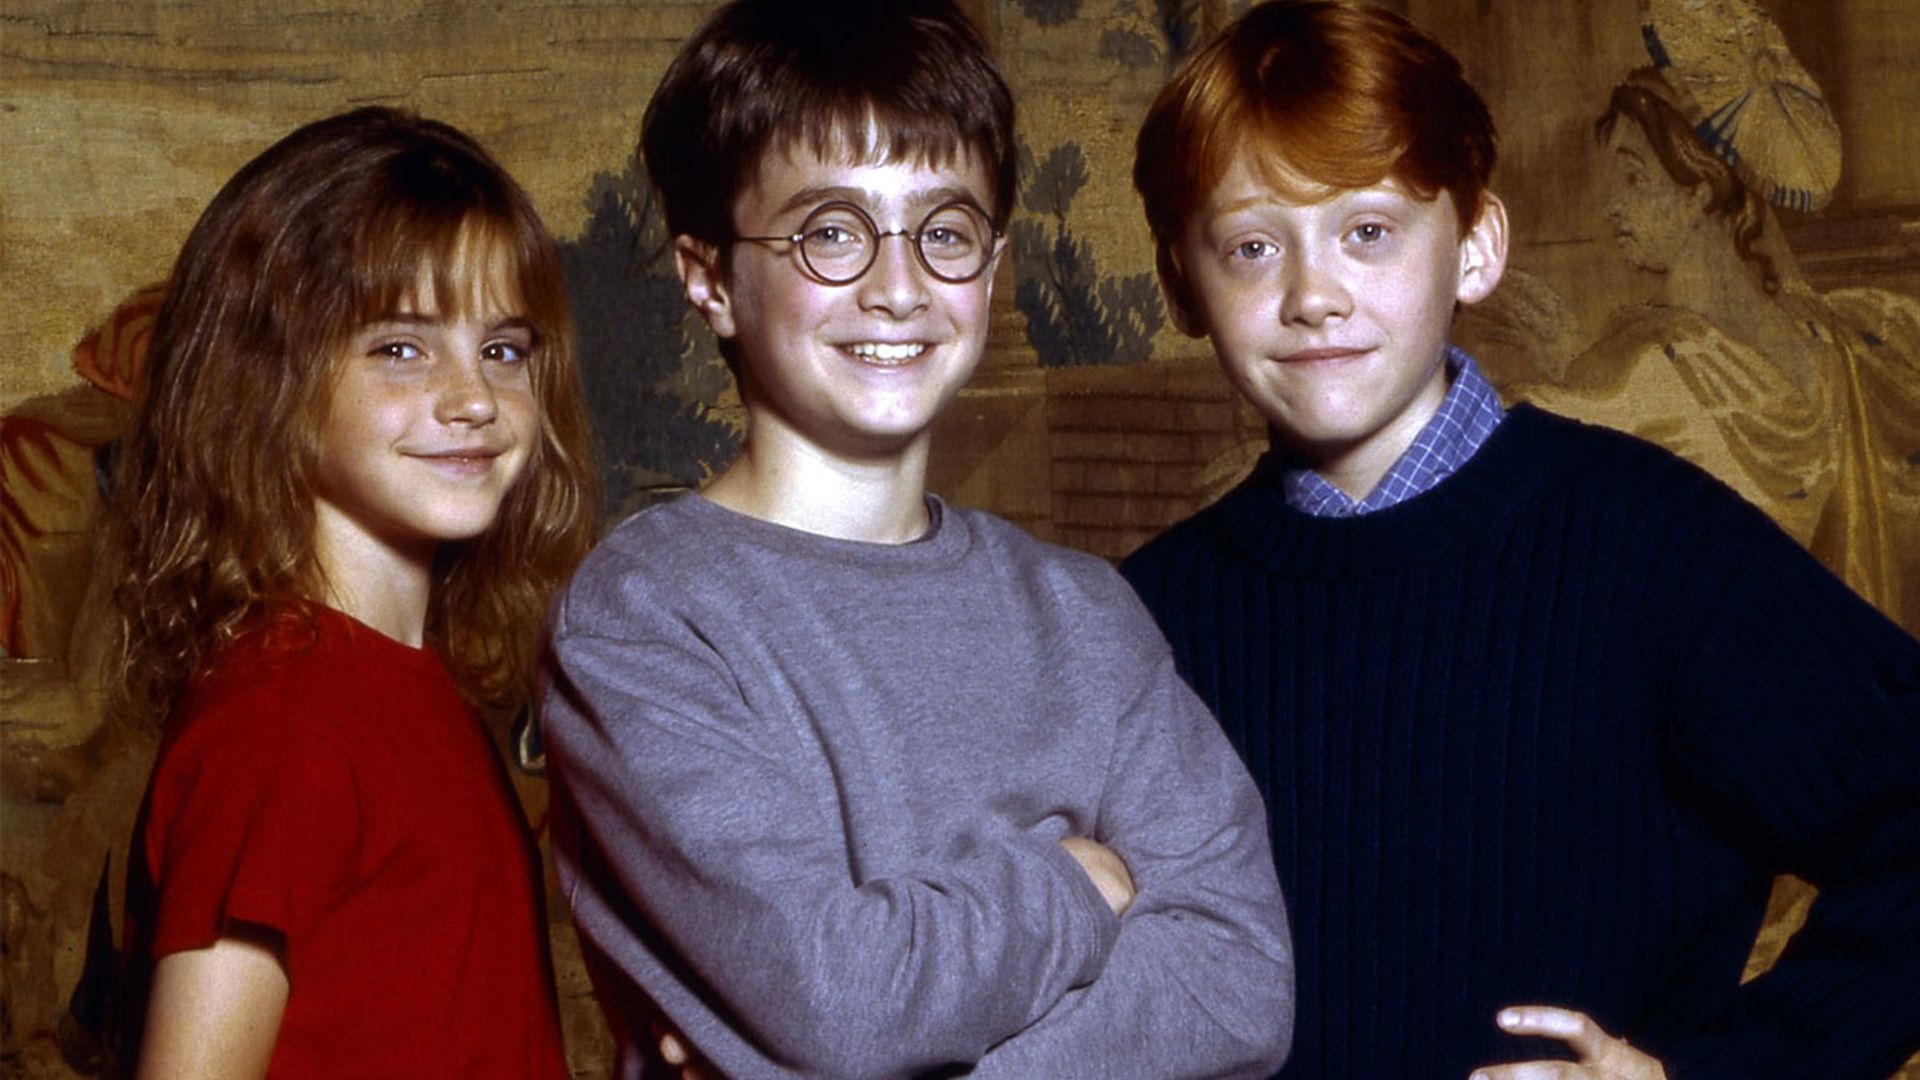 Harry Potter reunion: How to watch Return to Hogwarts reunion in the UK